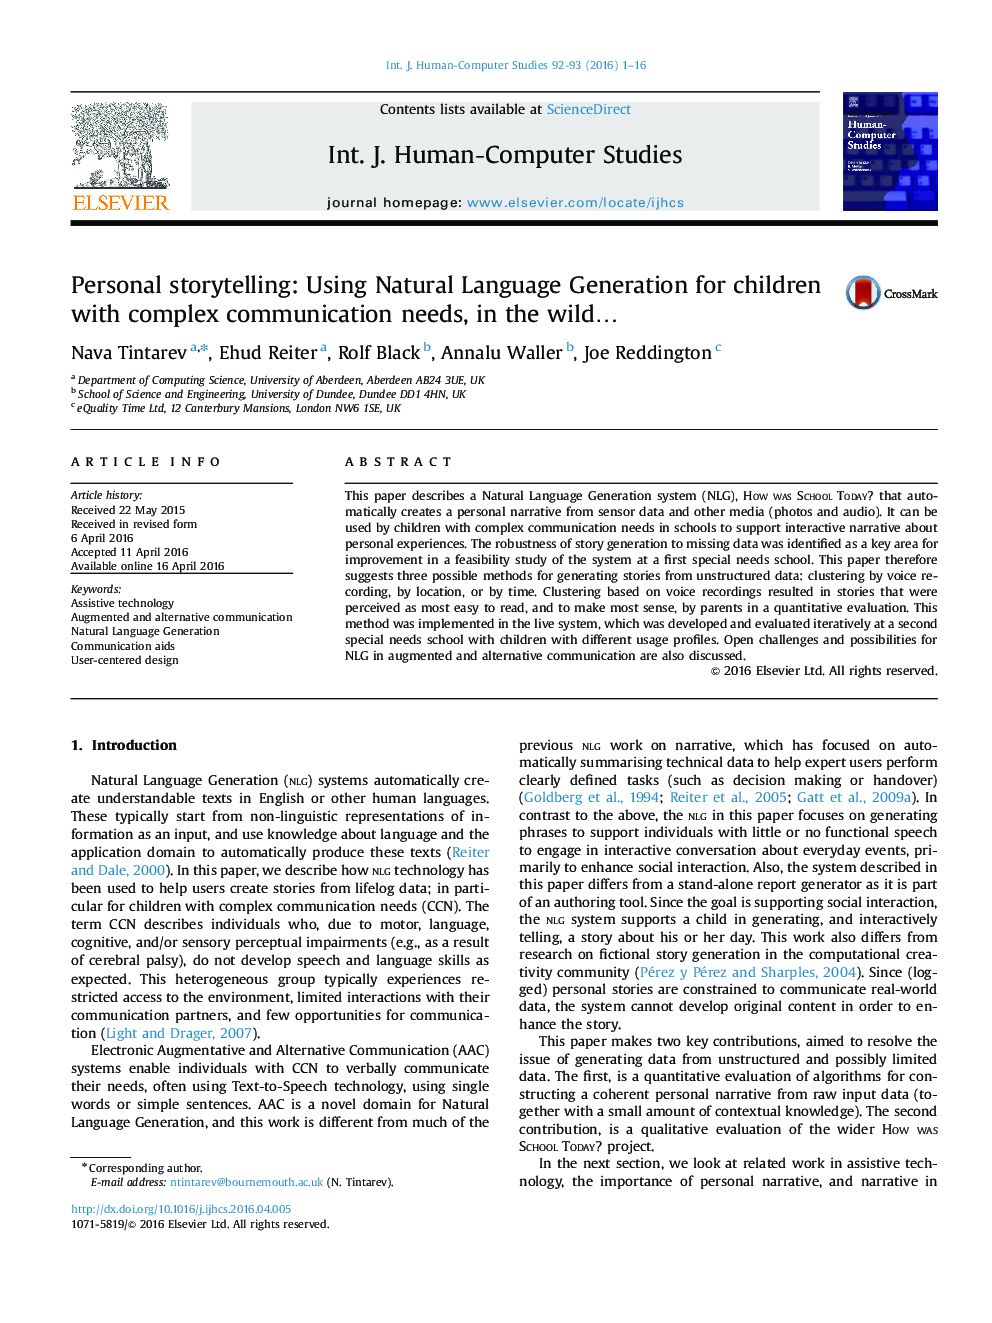 Personal storytelling: Using Natural Language Generation for children with complex communication needs, in the wild…